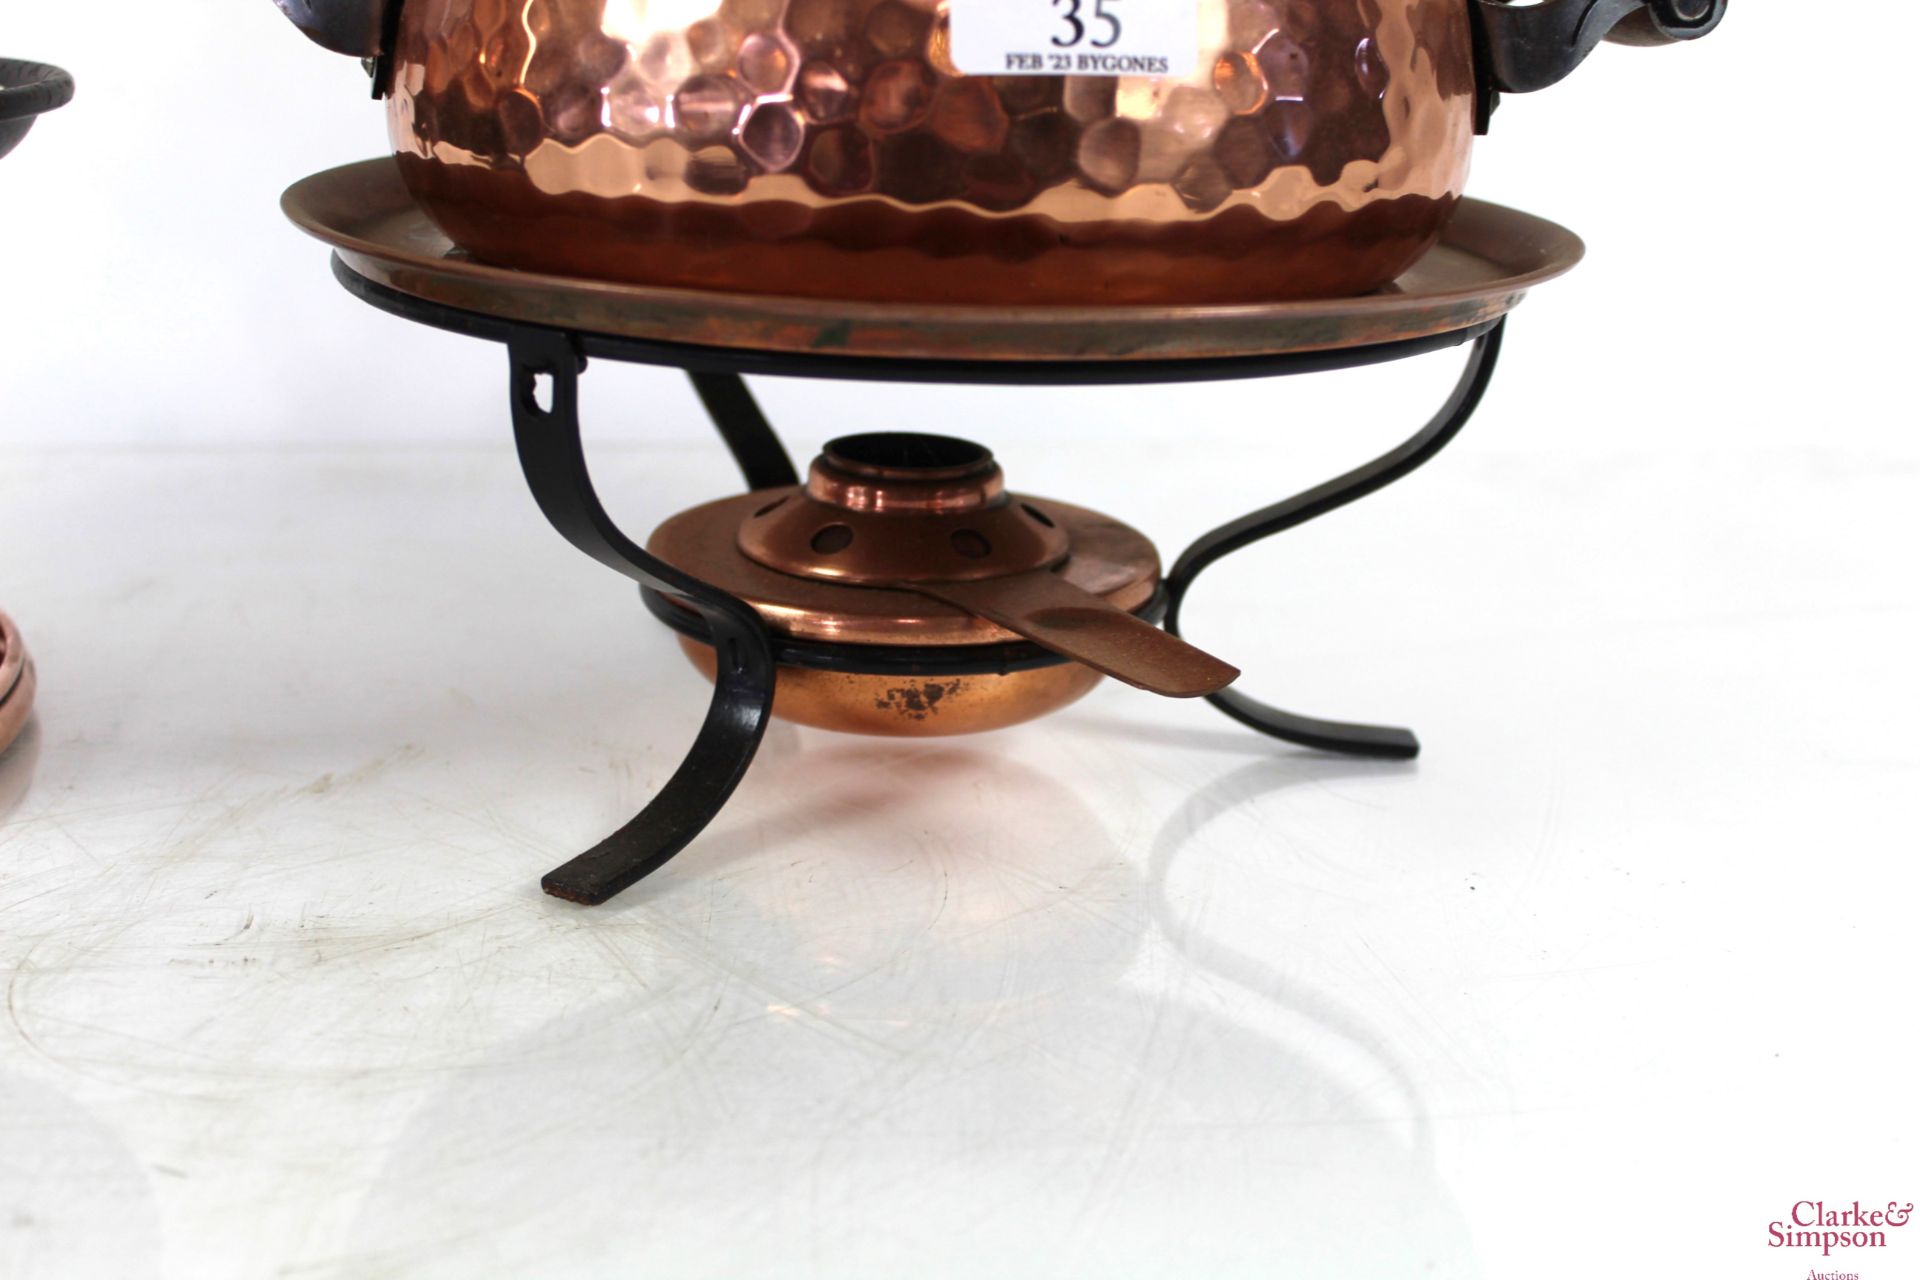 Two copper fondue sets with burners - Image 6 of 8